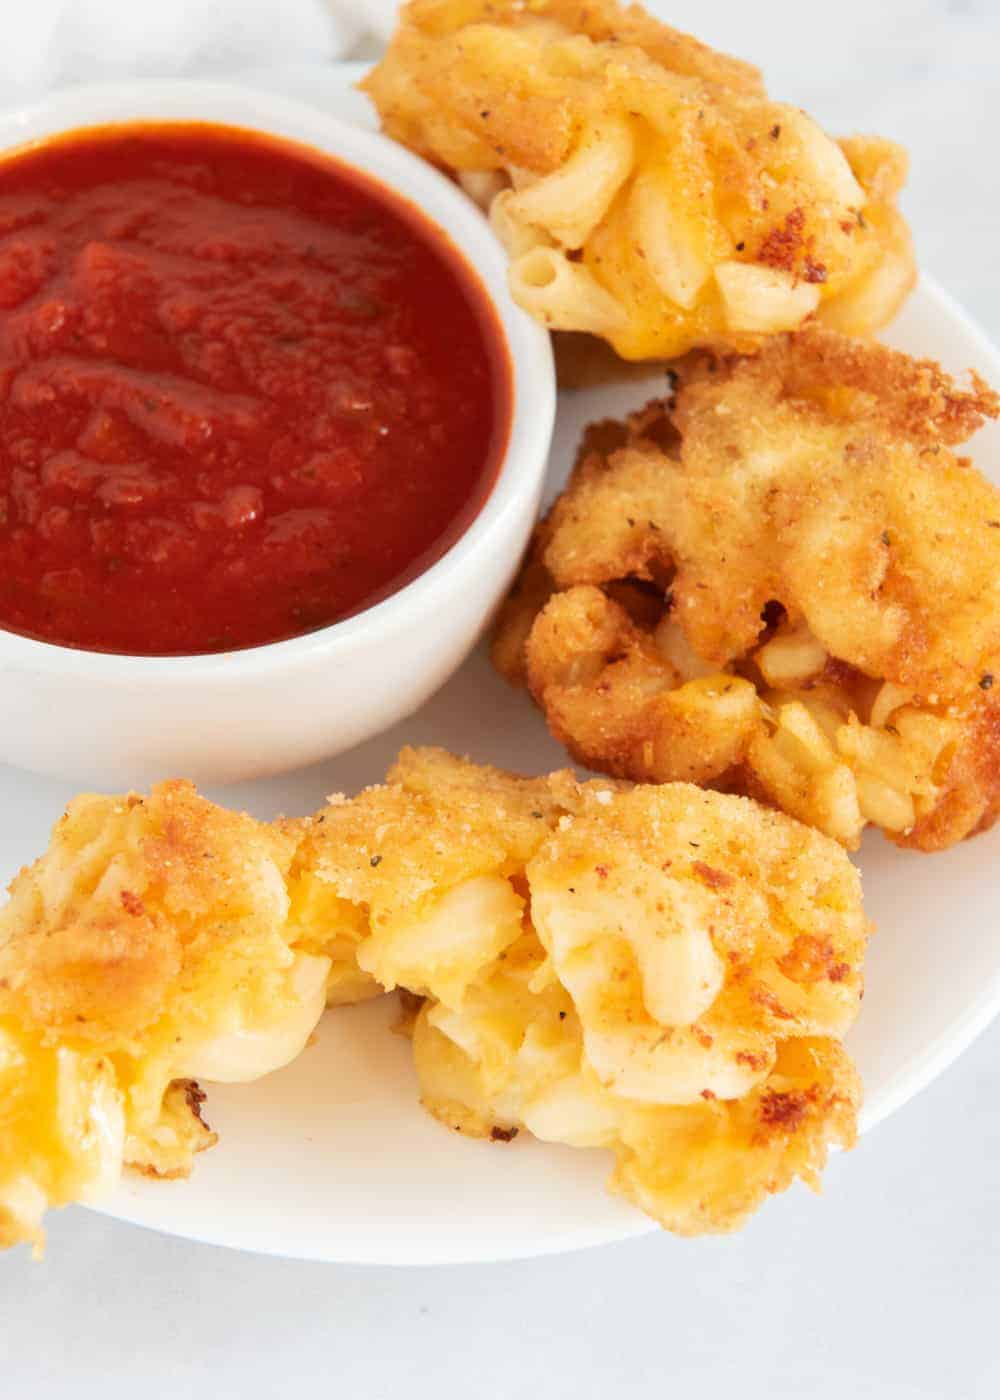 Fried macaroni and cheese with a bowl of marinara.